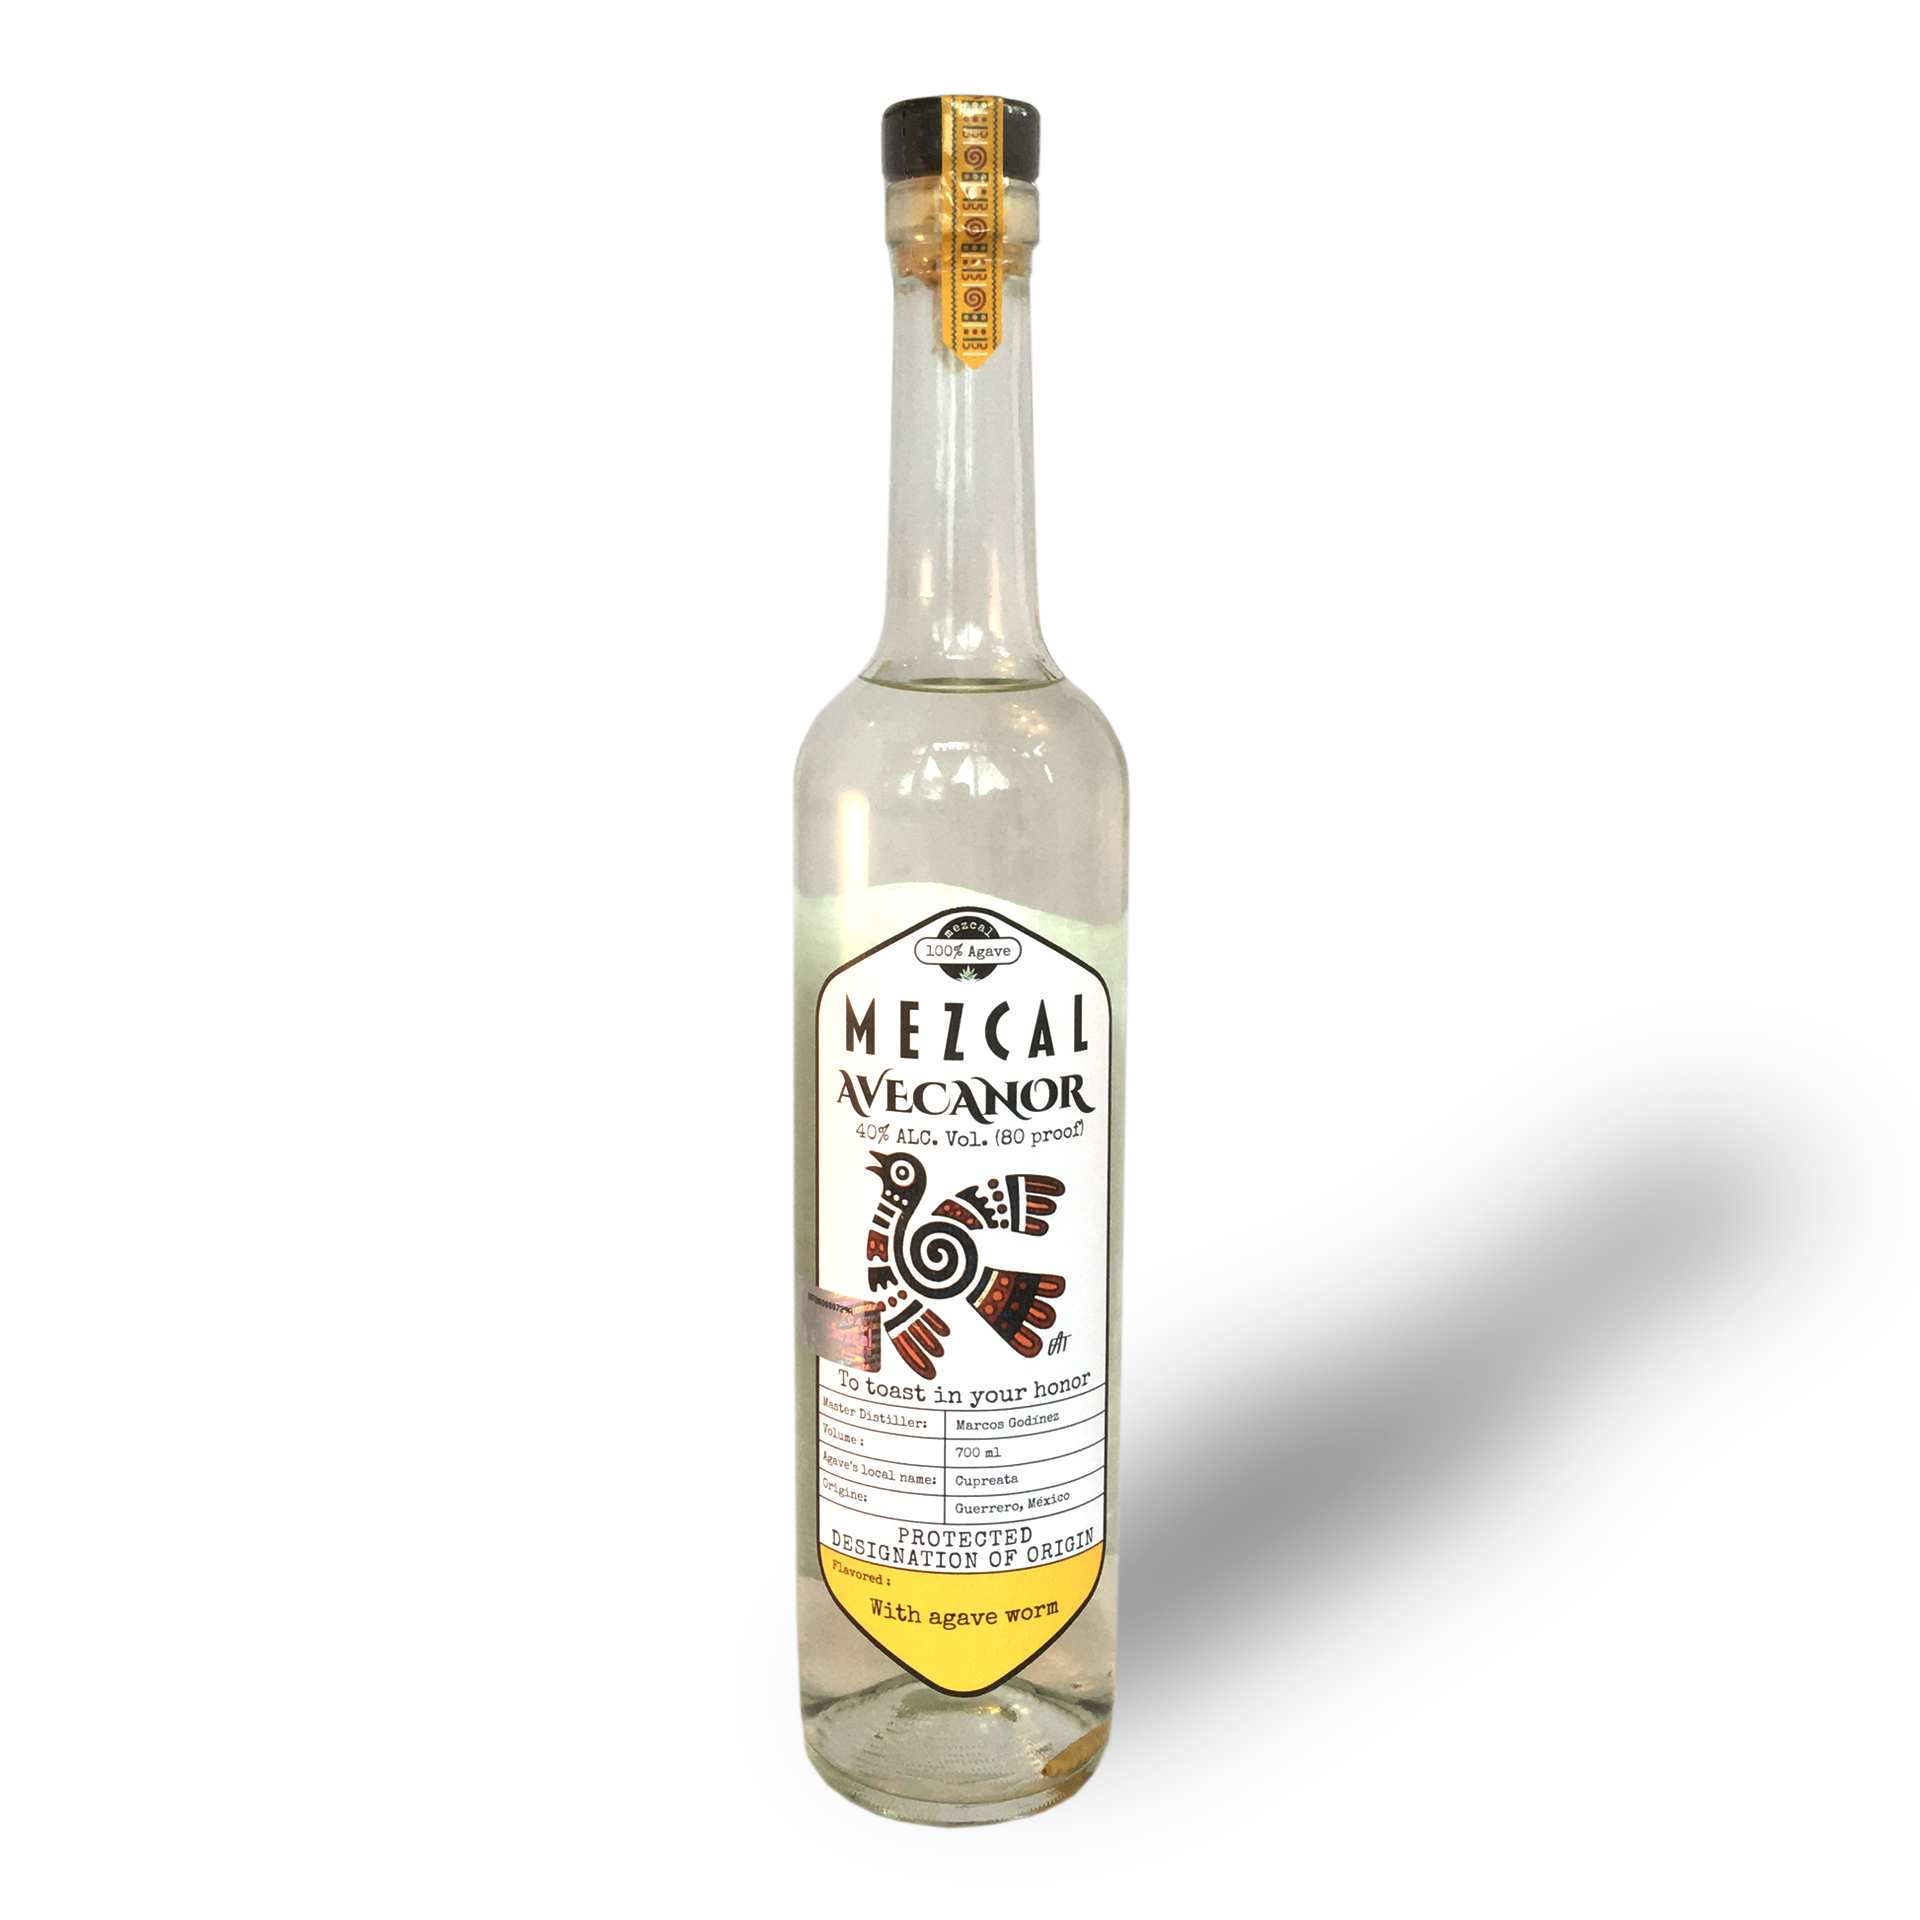 Avecanor Mezcal With Agave Worm- 1 Box 6 Bottles Of 700 Ml. 40% Vol.